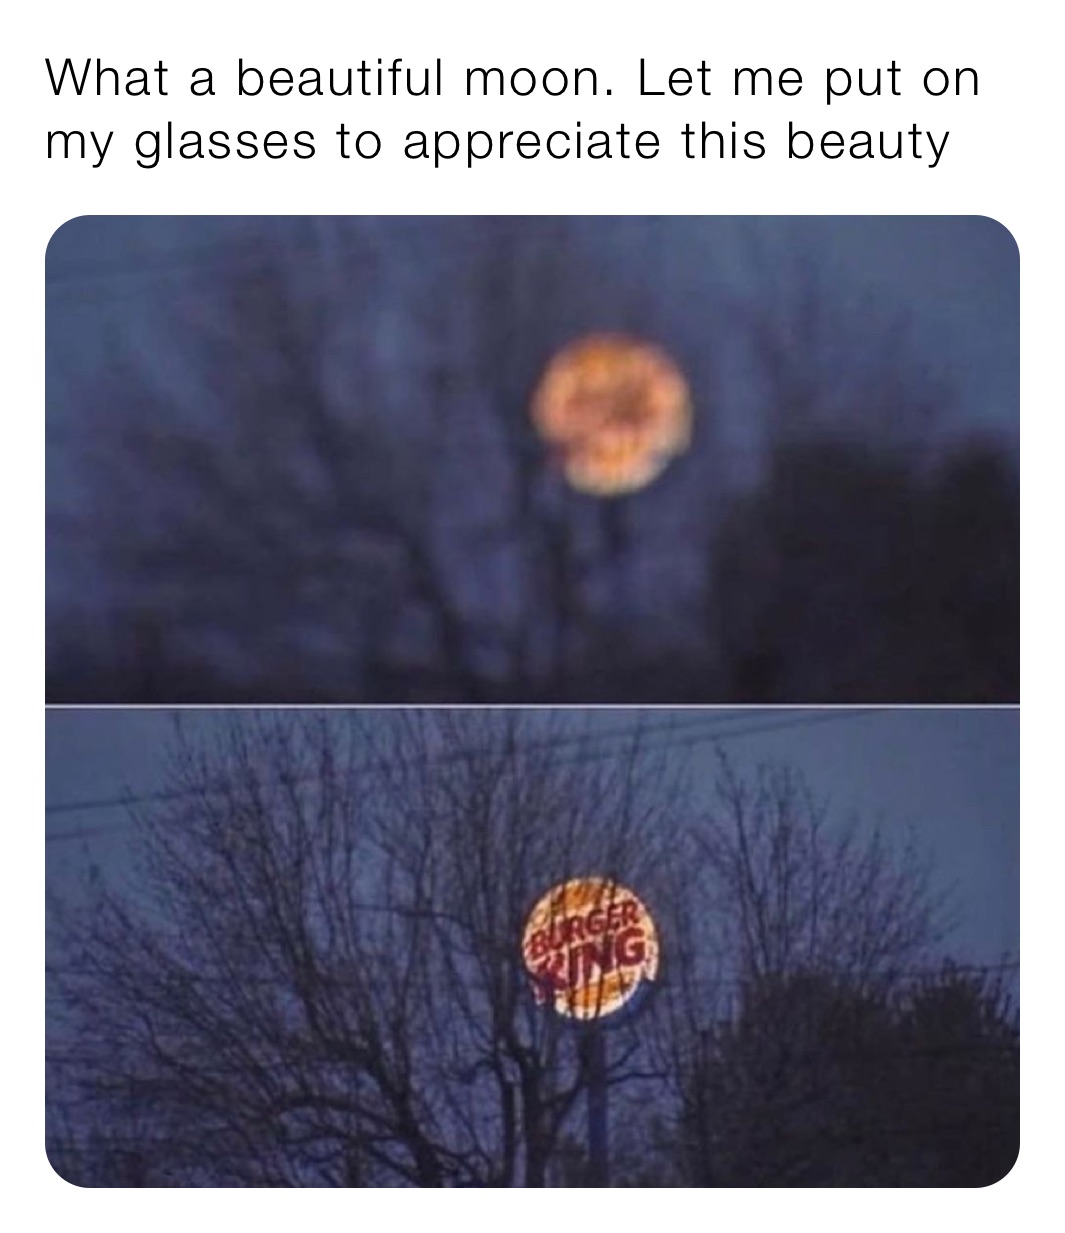 What a beautiful moon. Let me put on my glasses to appreciate this beauty